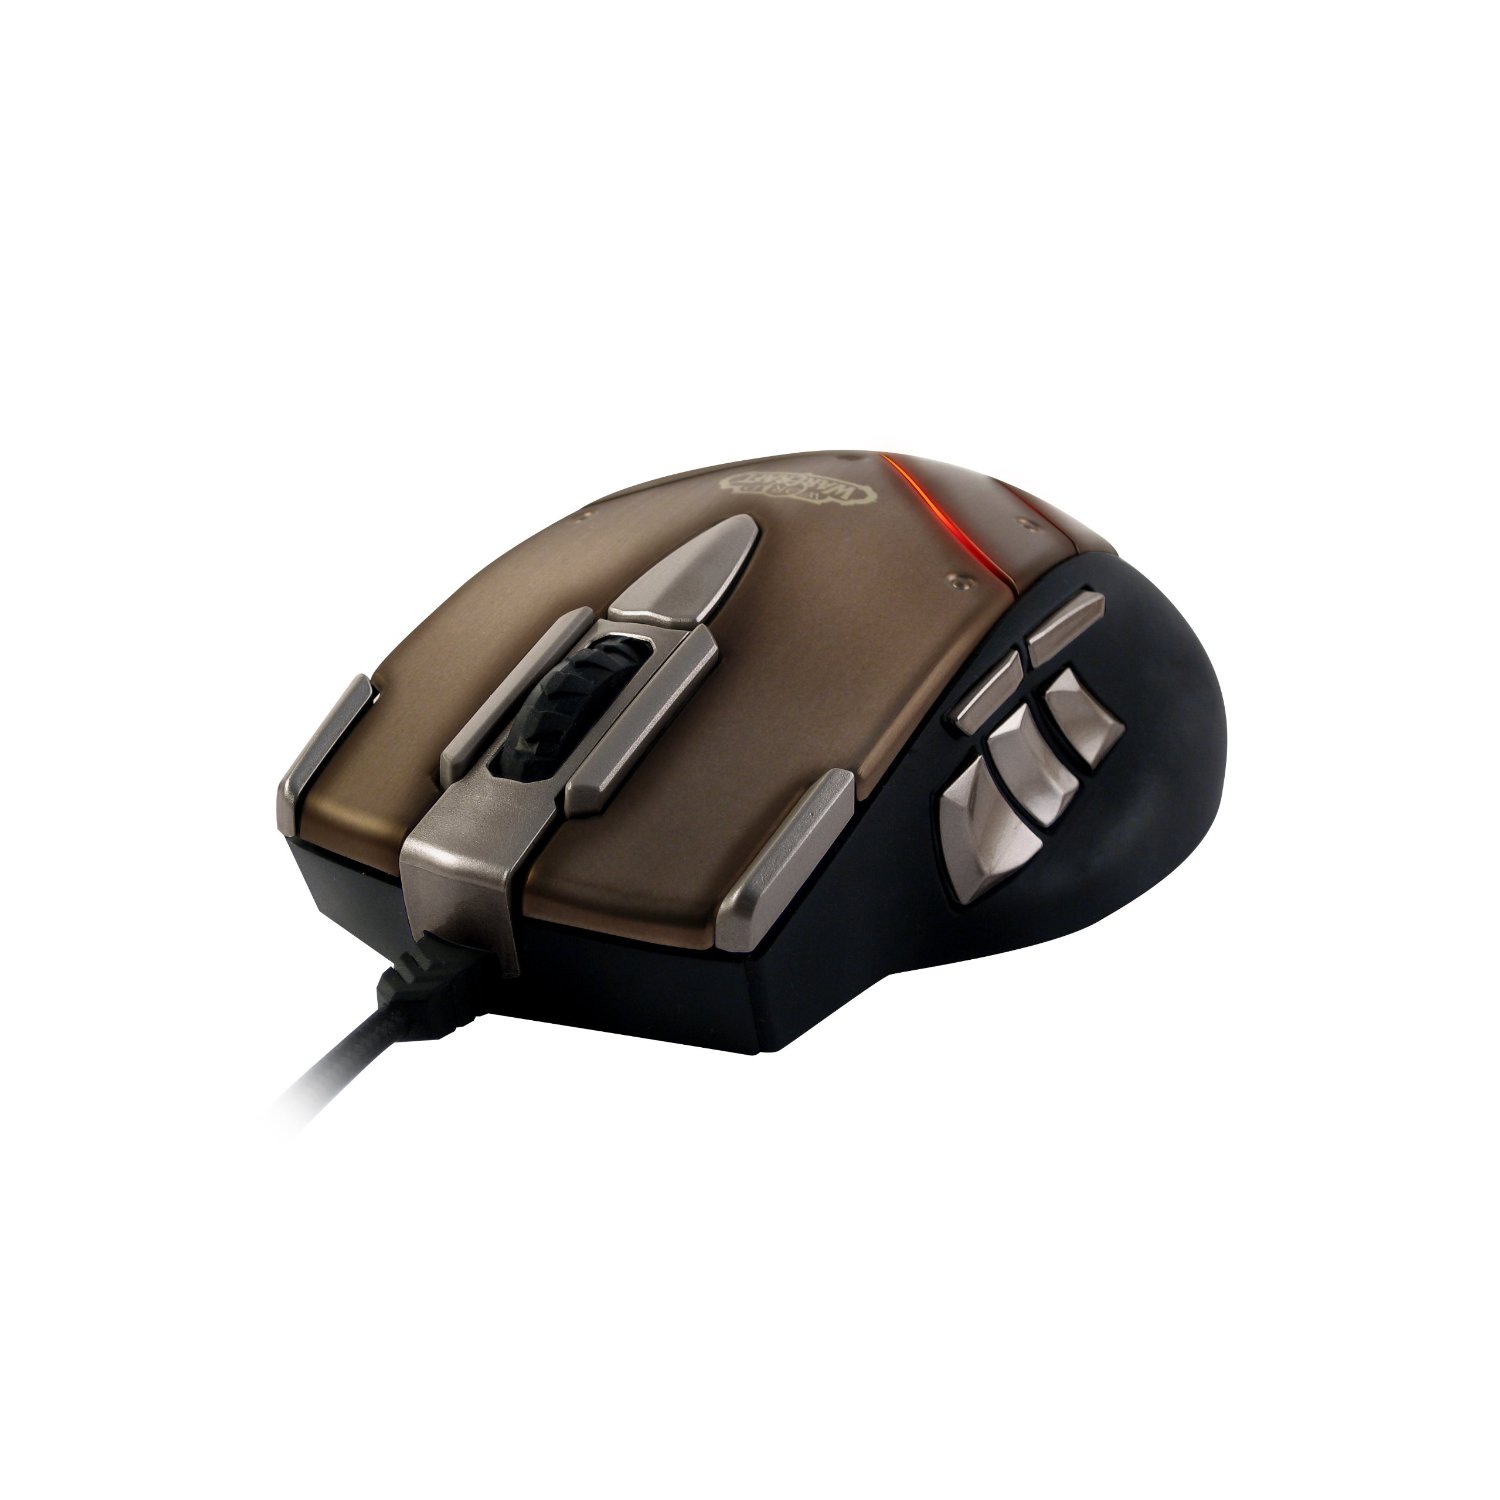 http://thetechjournal.com/wp-content/uploads/images/1202/1329465639-steelseries-world-of-warcraft-cataclysm-mmo-gaming-mouse-2.jpg